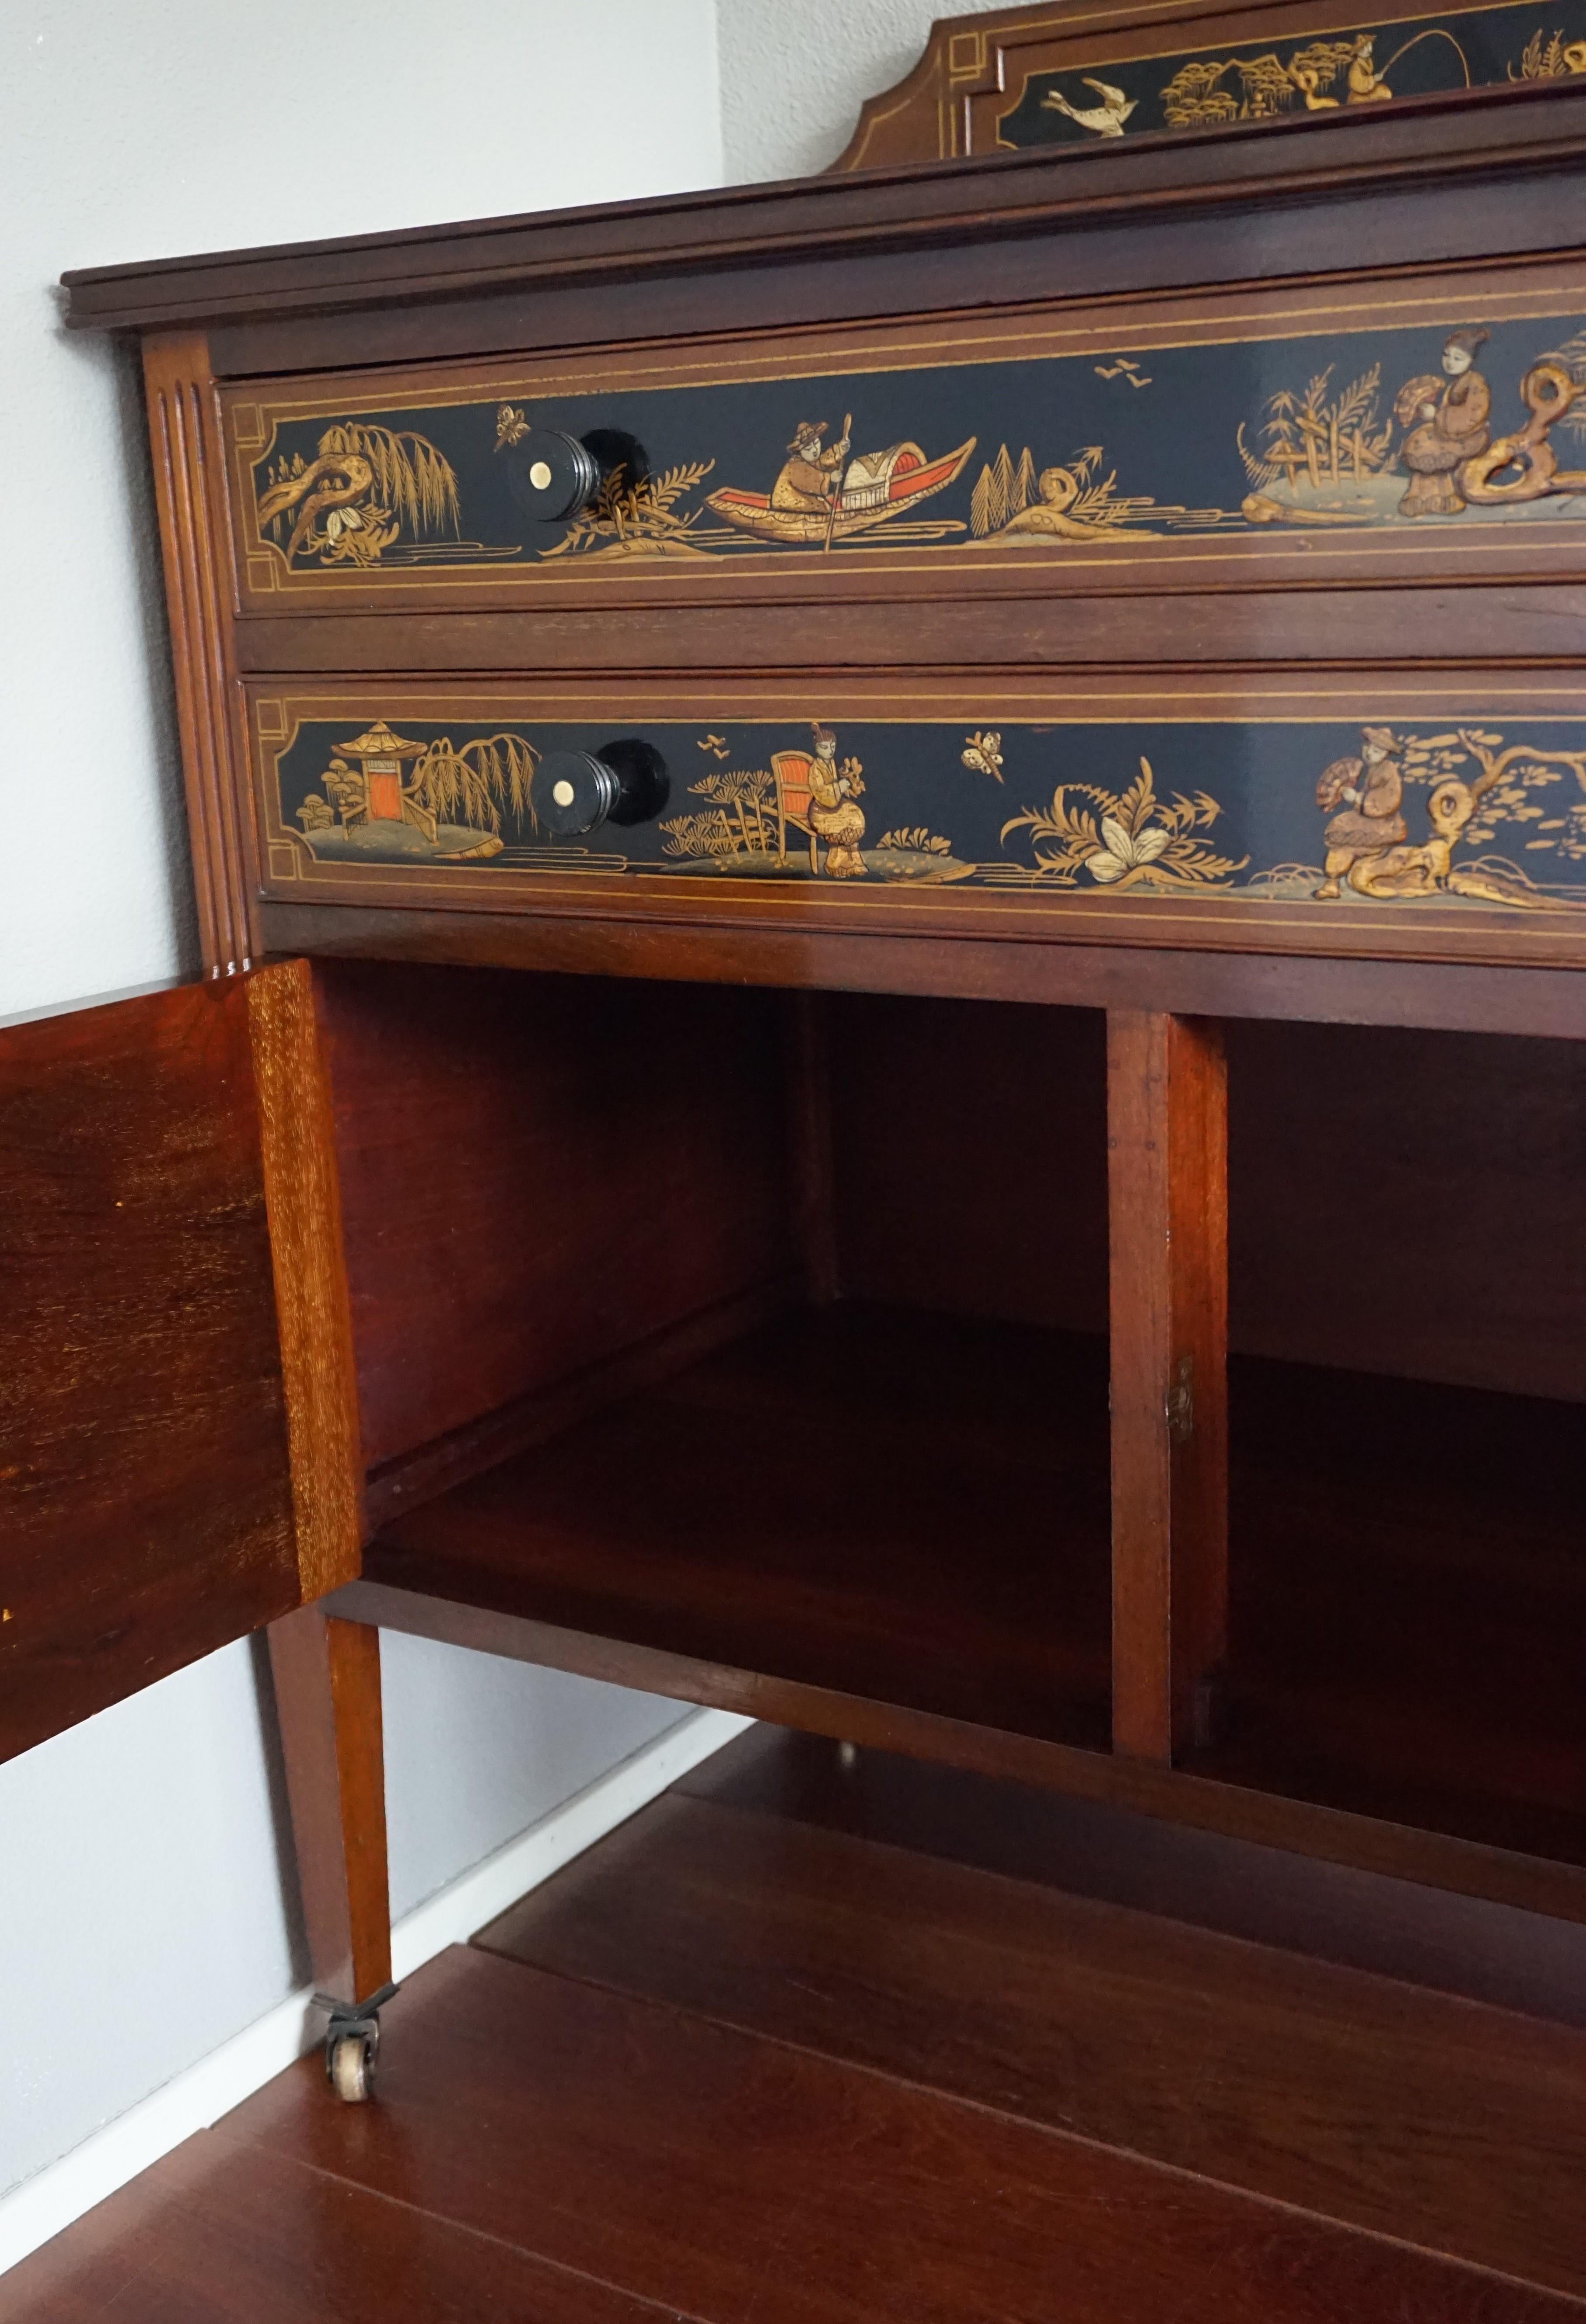 Bone Antique & Hand-Painted, Mahogany Dresser / Commode in Stunning Chinoiserie Style